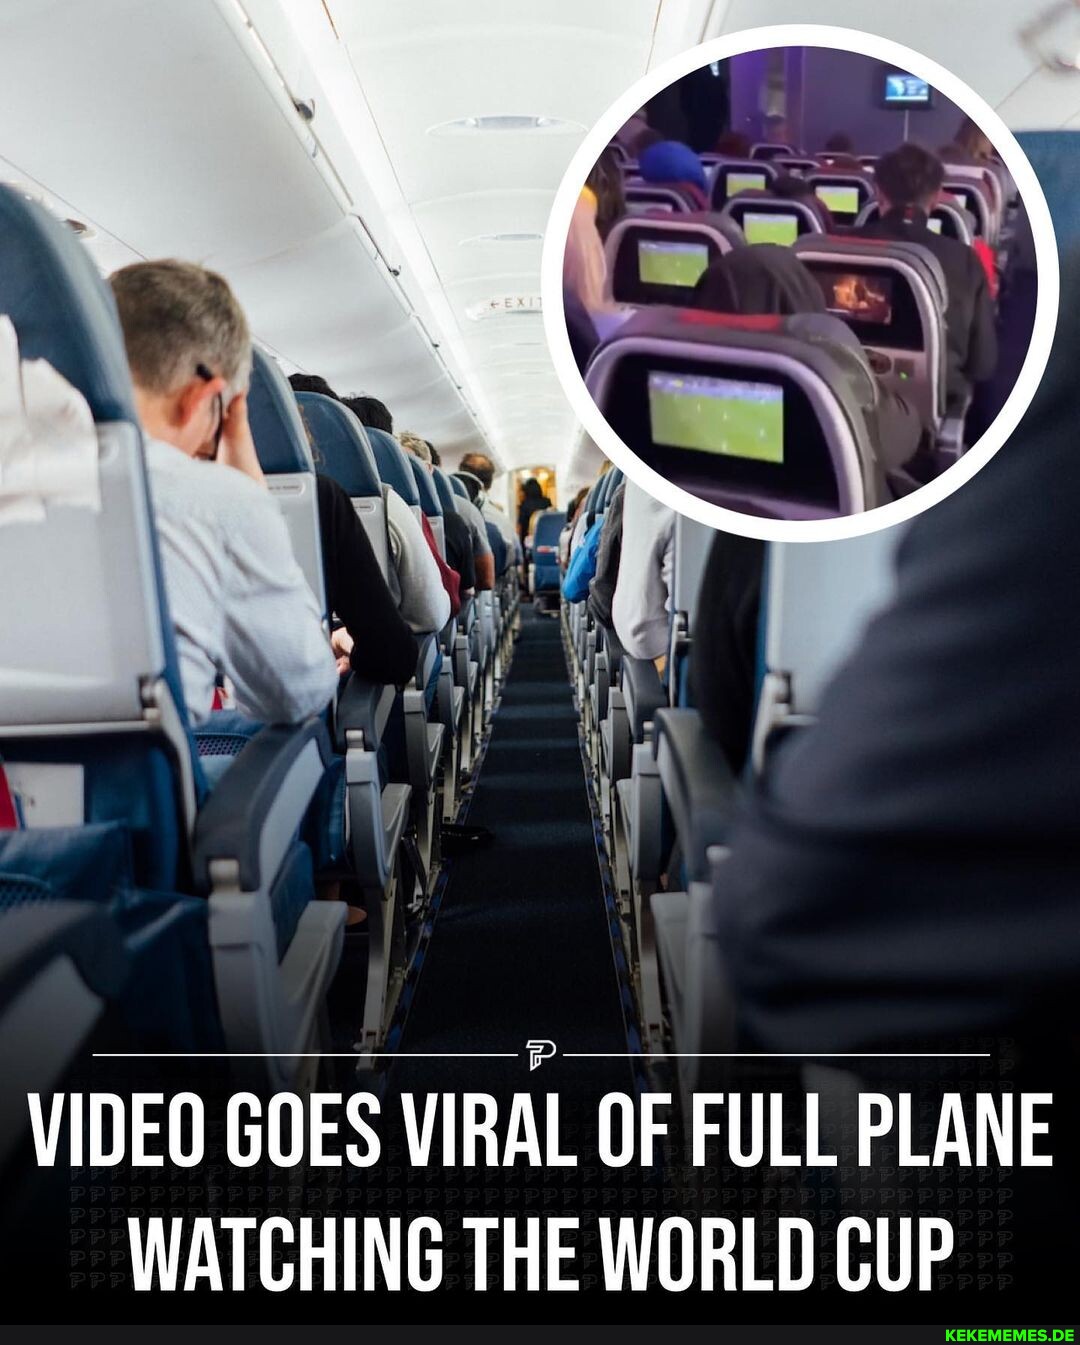 VIDEO GOES VIRAL OF FULL PLANE WATCHING THE WORLD CUP